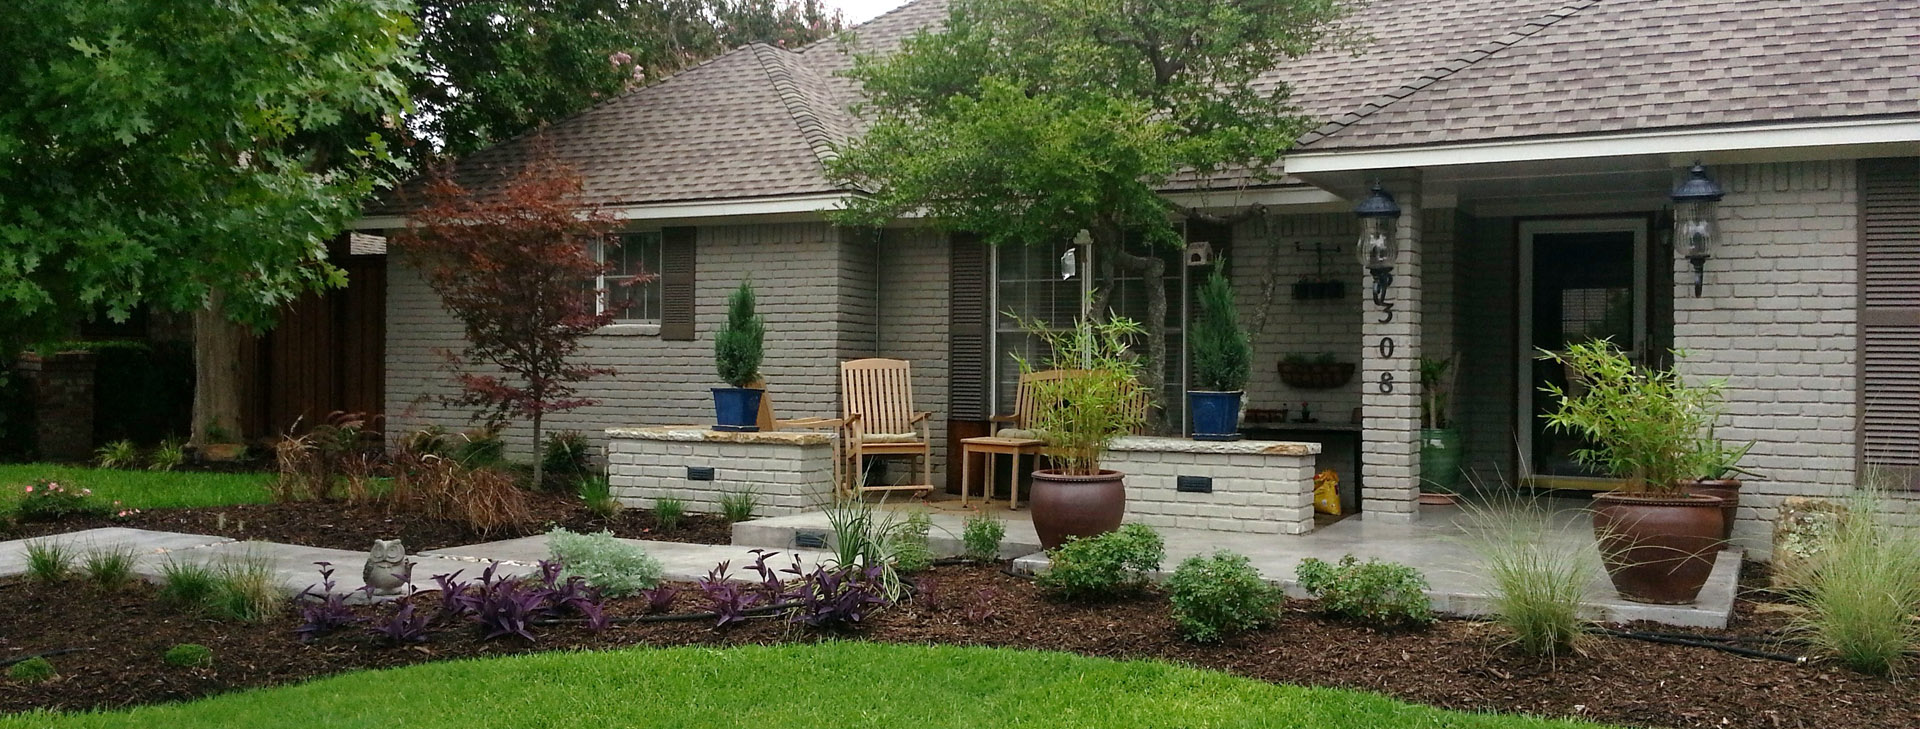 new front patio and garden landscape design